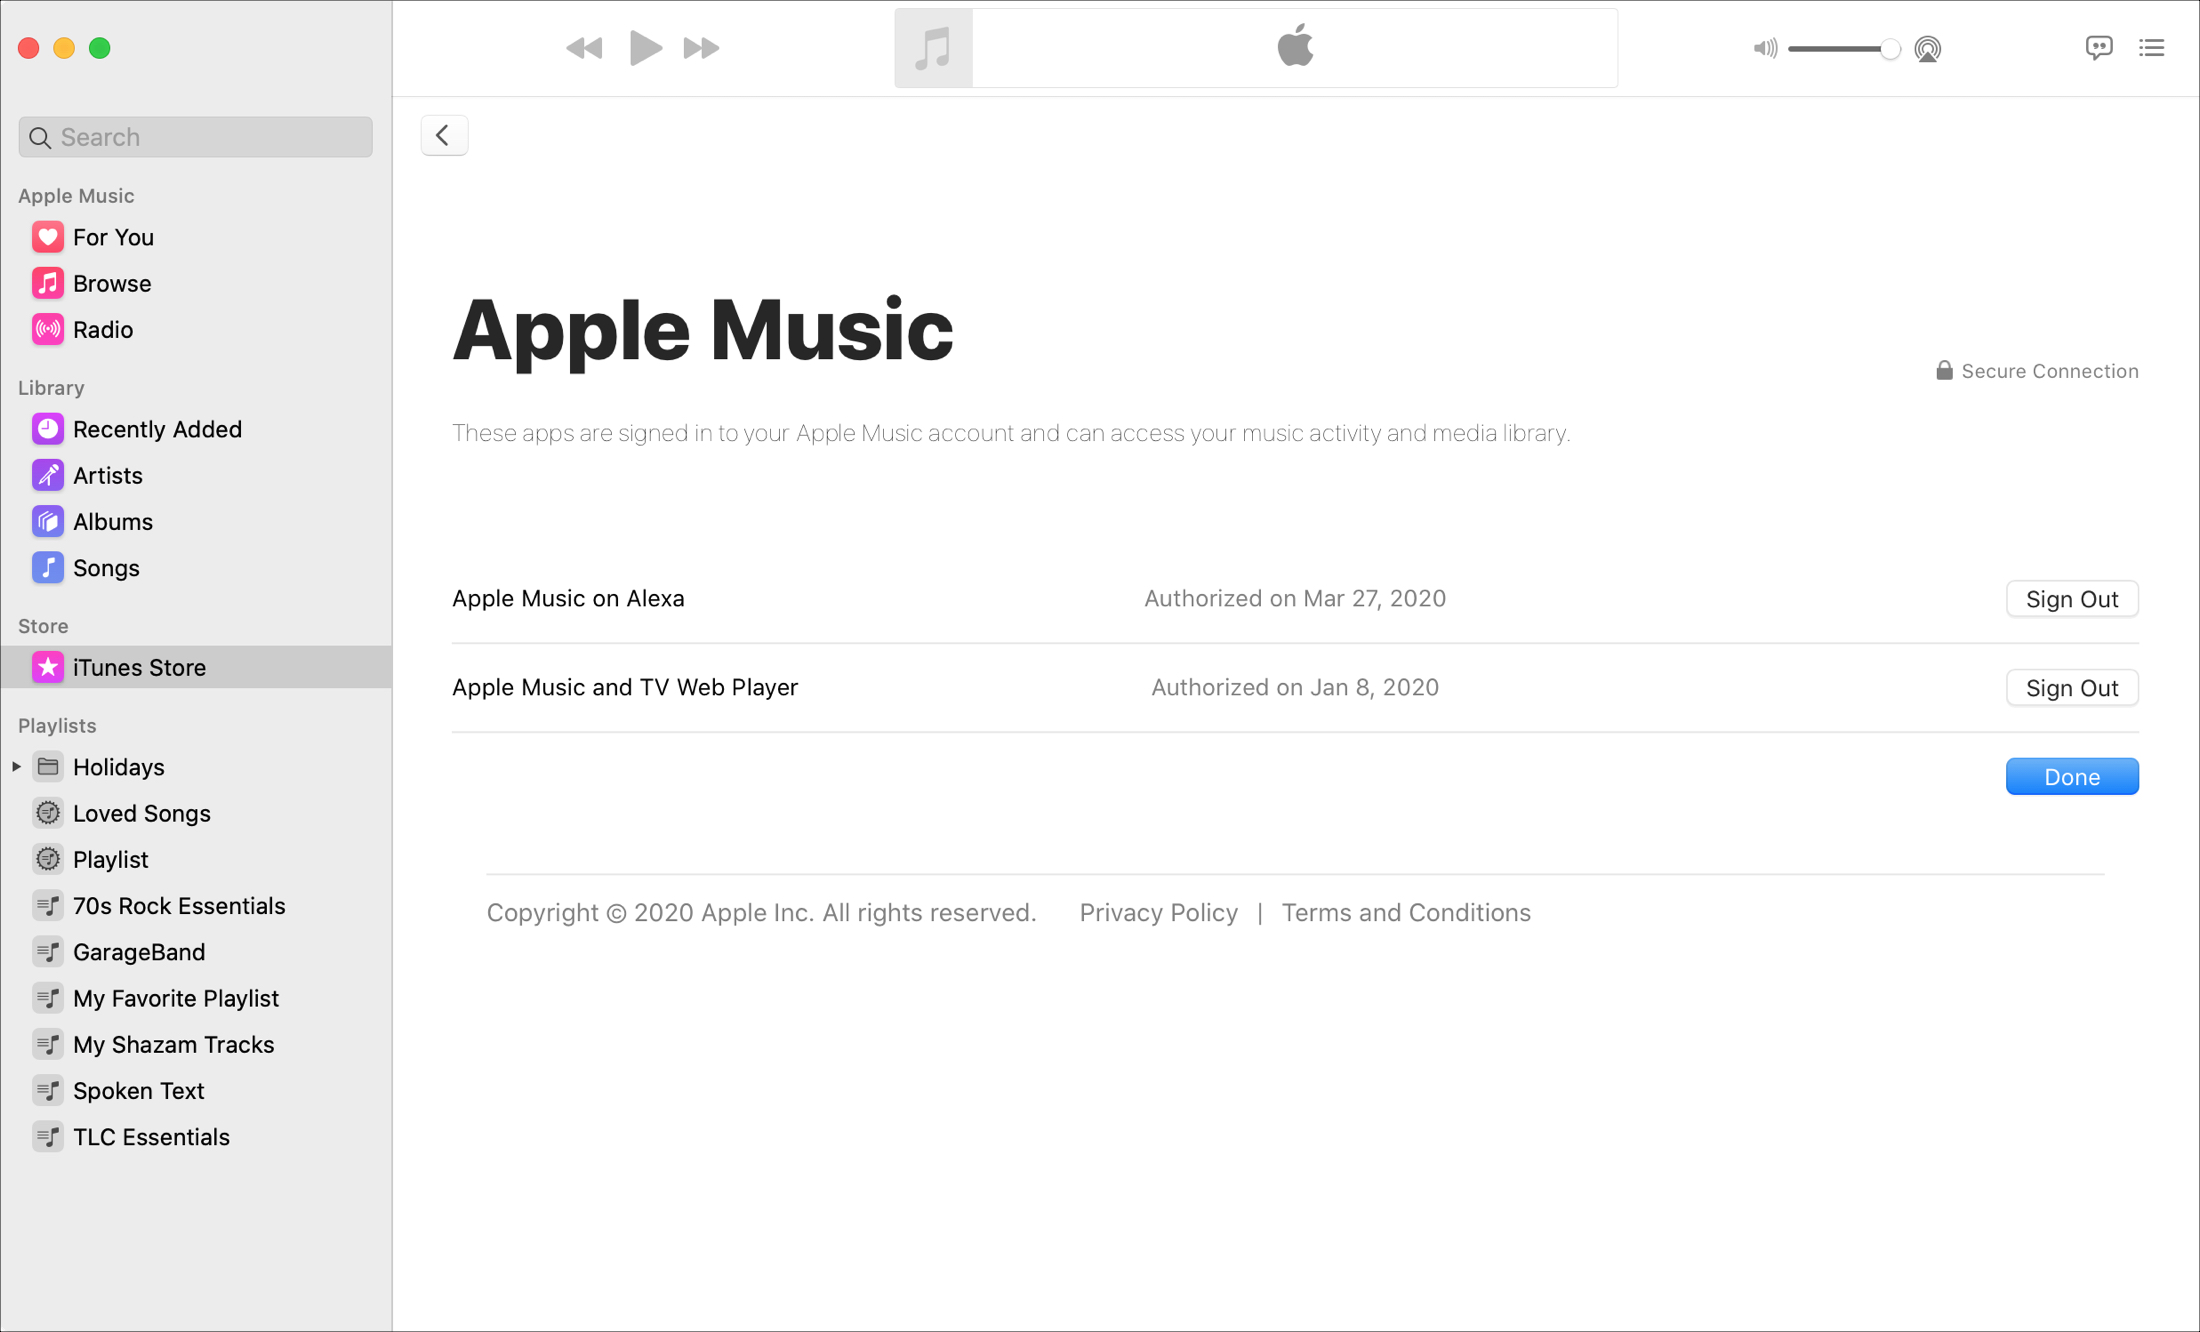 Mac Apple Music Apps With Access